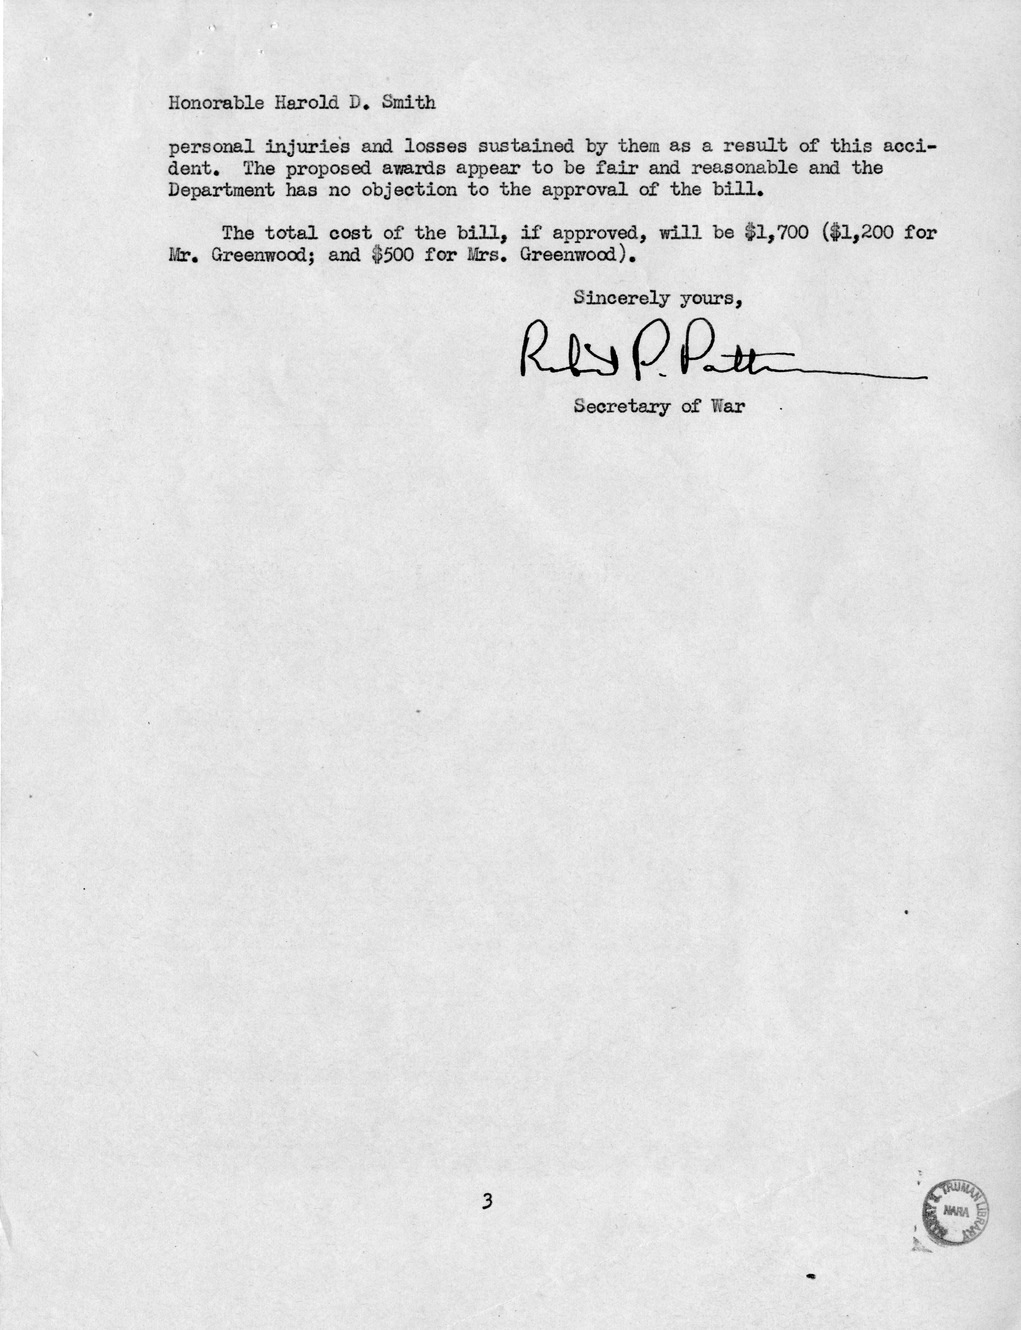 Memorandum from Frederick J. Bailey to M. C. Latta, H.R. 2686, For the Relief of Ben Greenwood and Dovie Greenwood, with Attachments